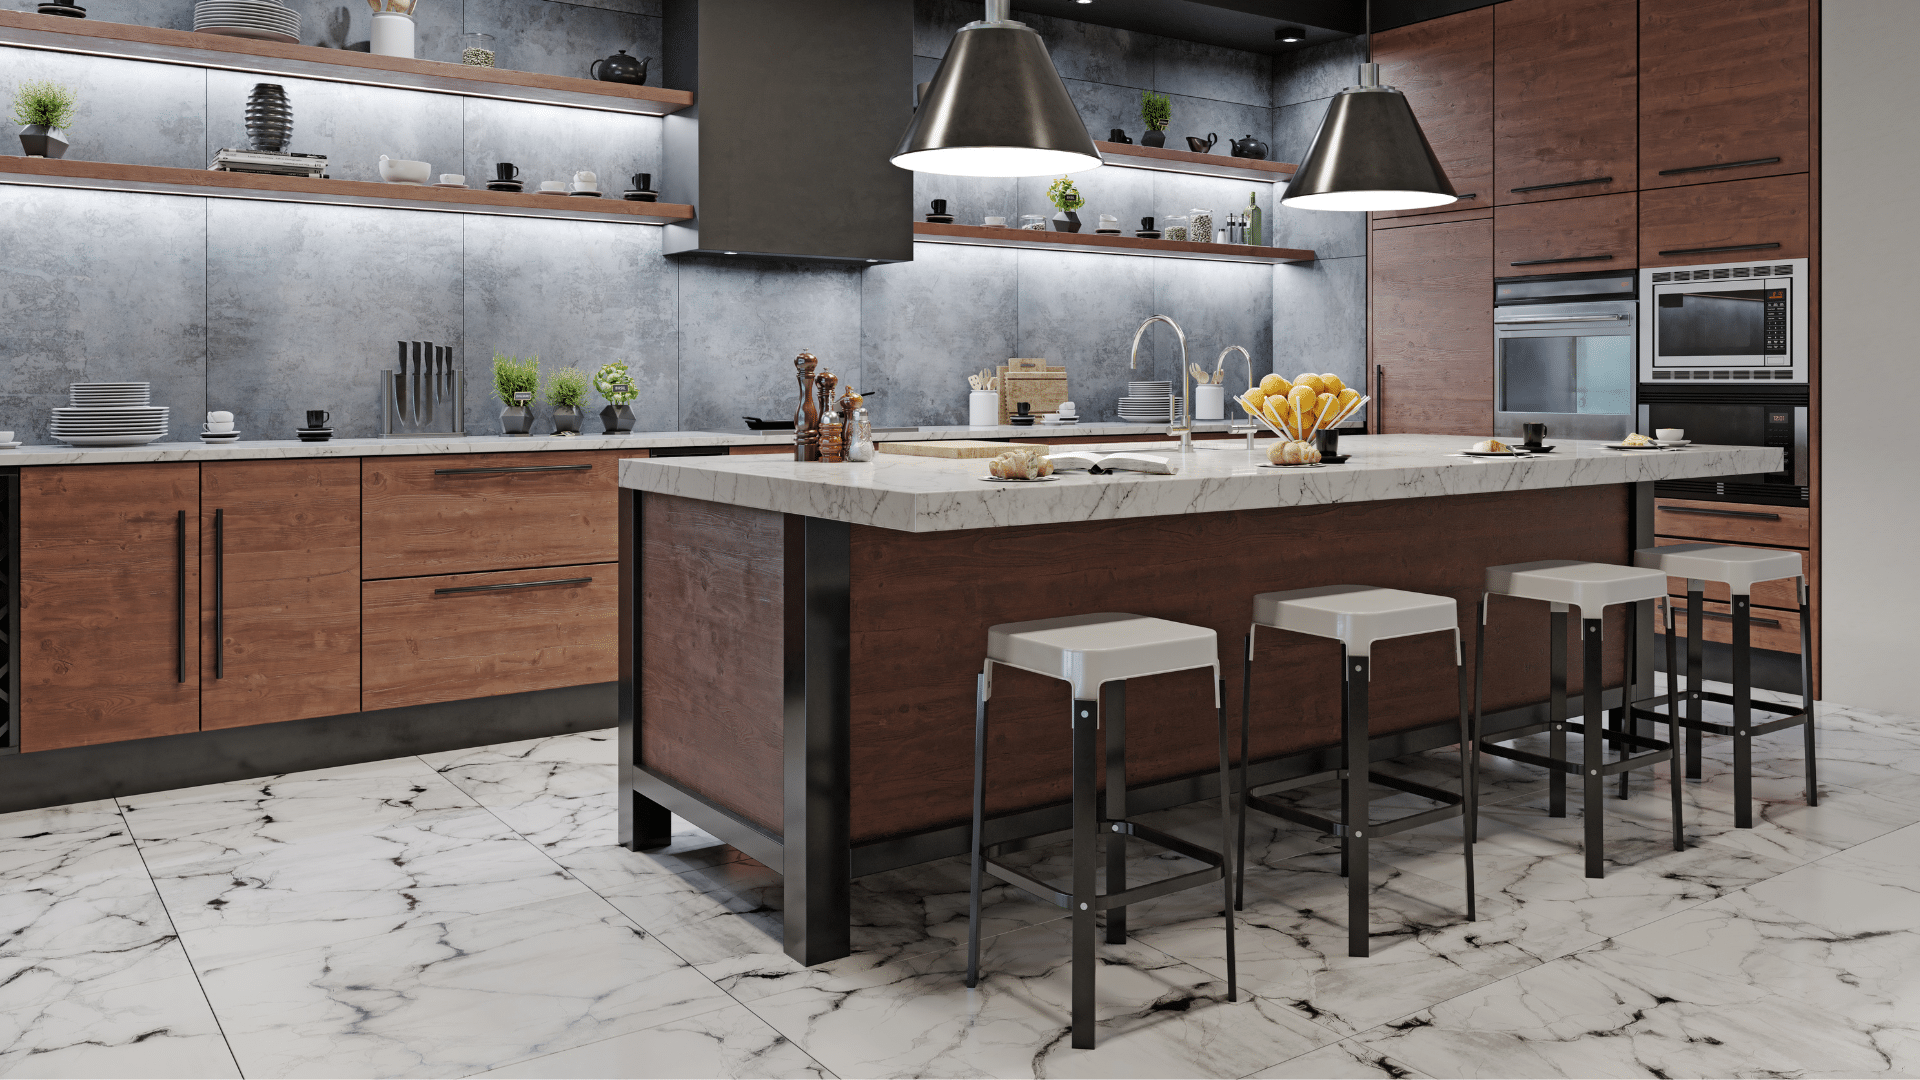 Benefits of metal kitchen island legs in dining area